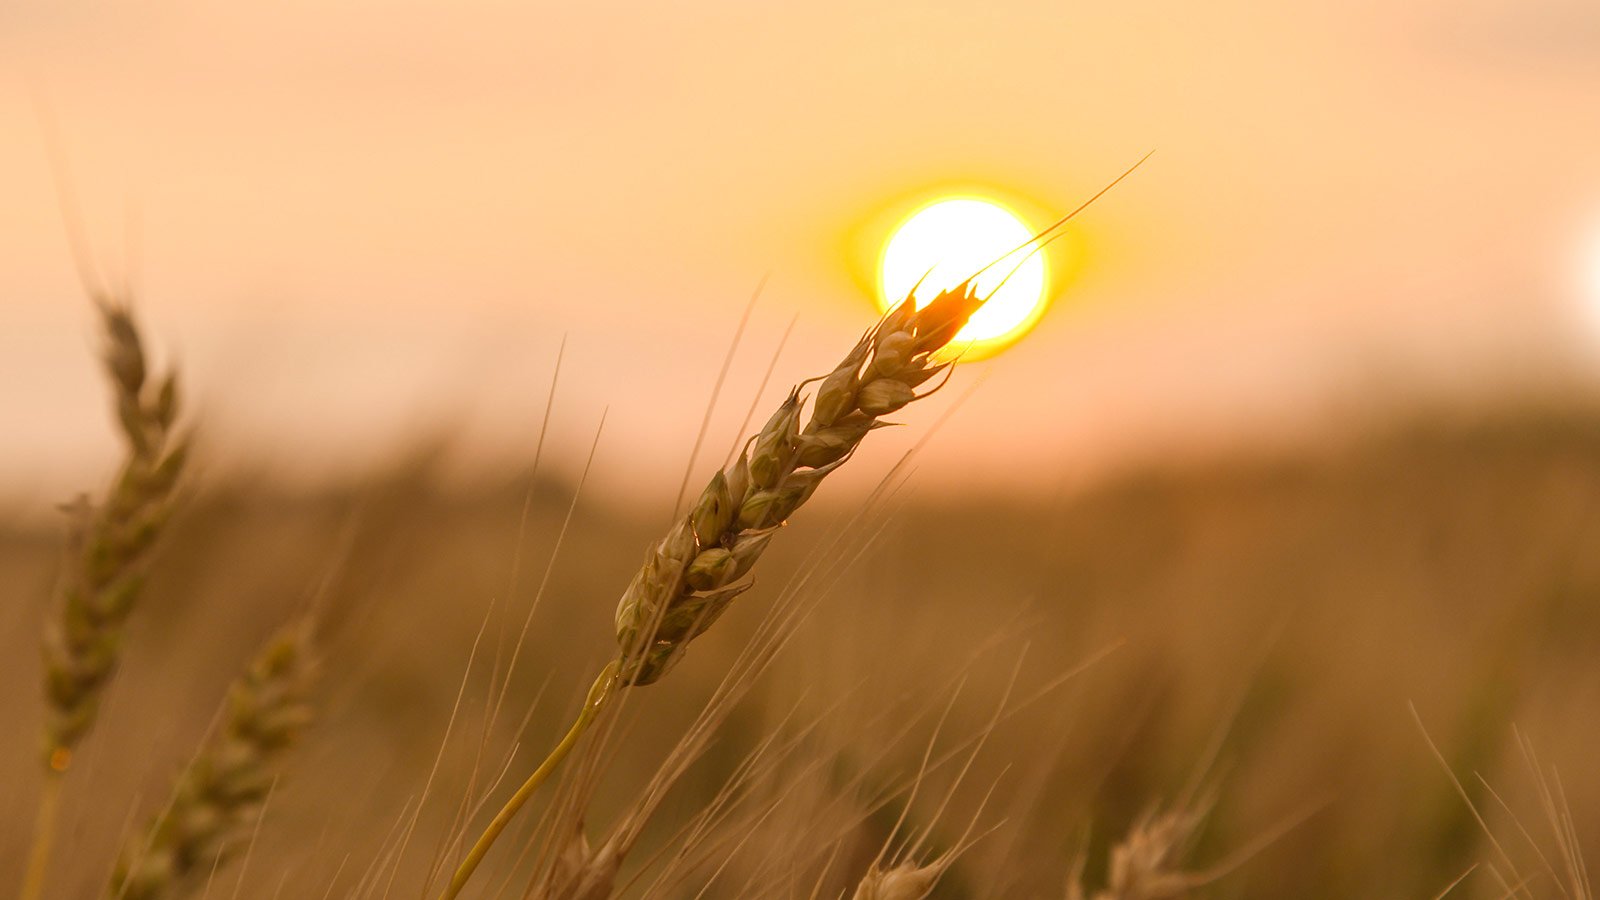 Stems of wheat in a field with the setting sun in the background